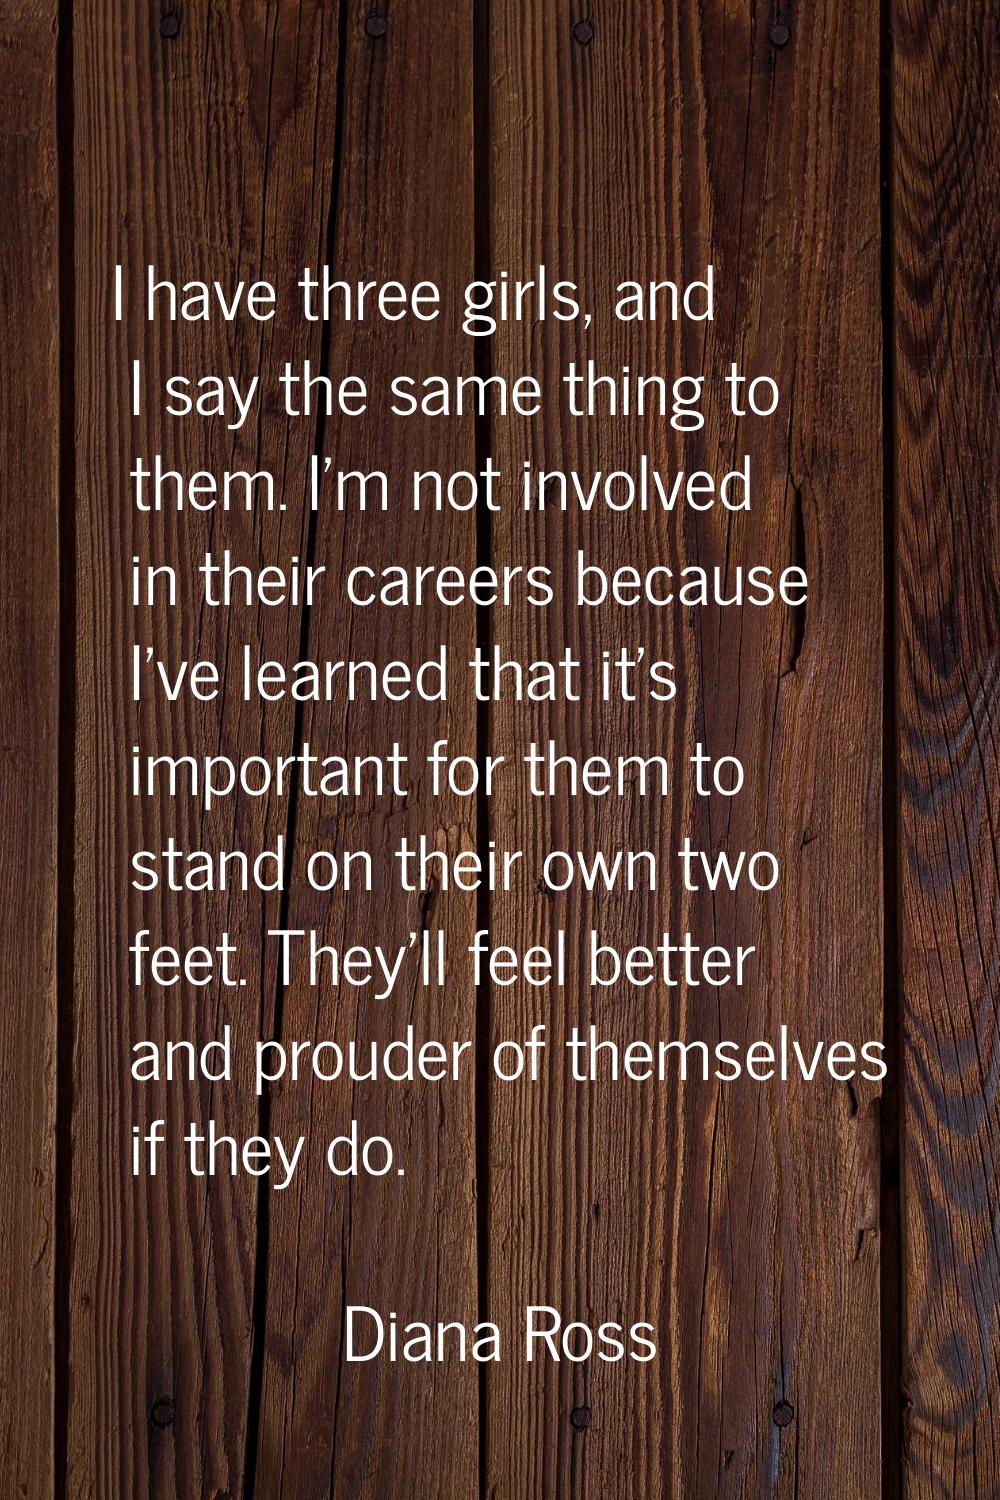 I have three girls, and I say the same thing to them. I'm not involved in their careers because I'v